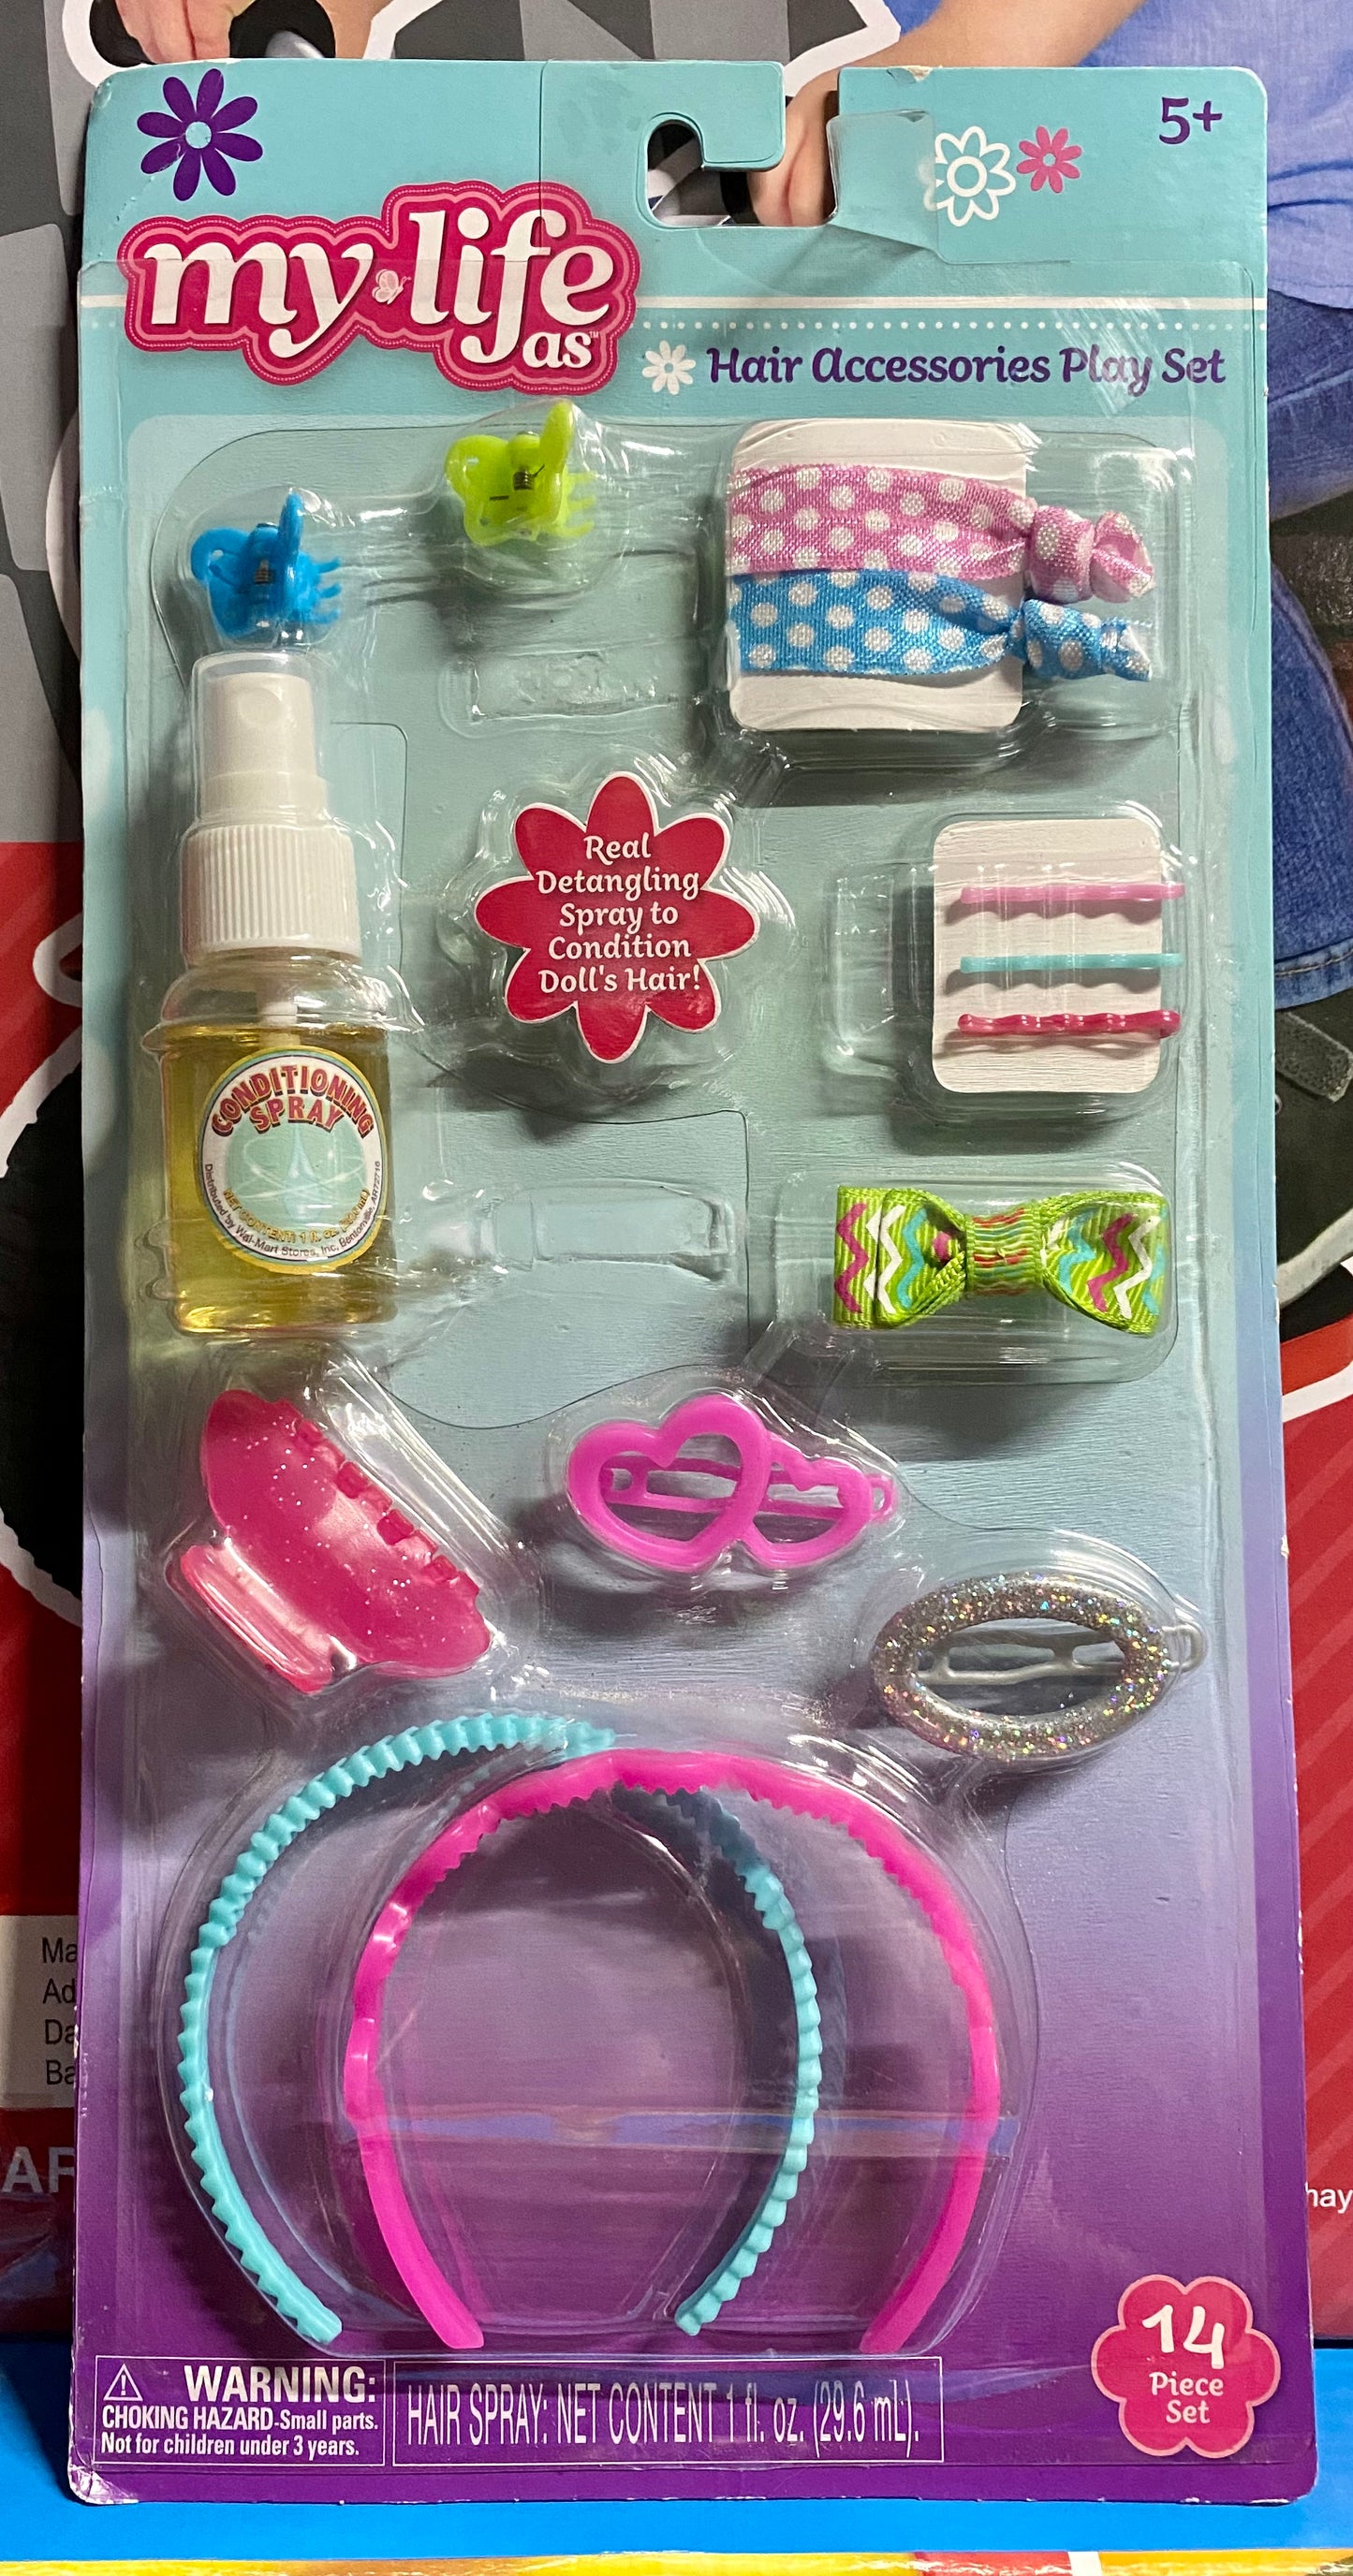 My Life As 14-Piece Hair Accessories Play Set 29359